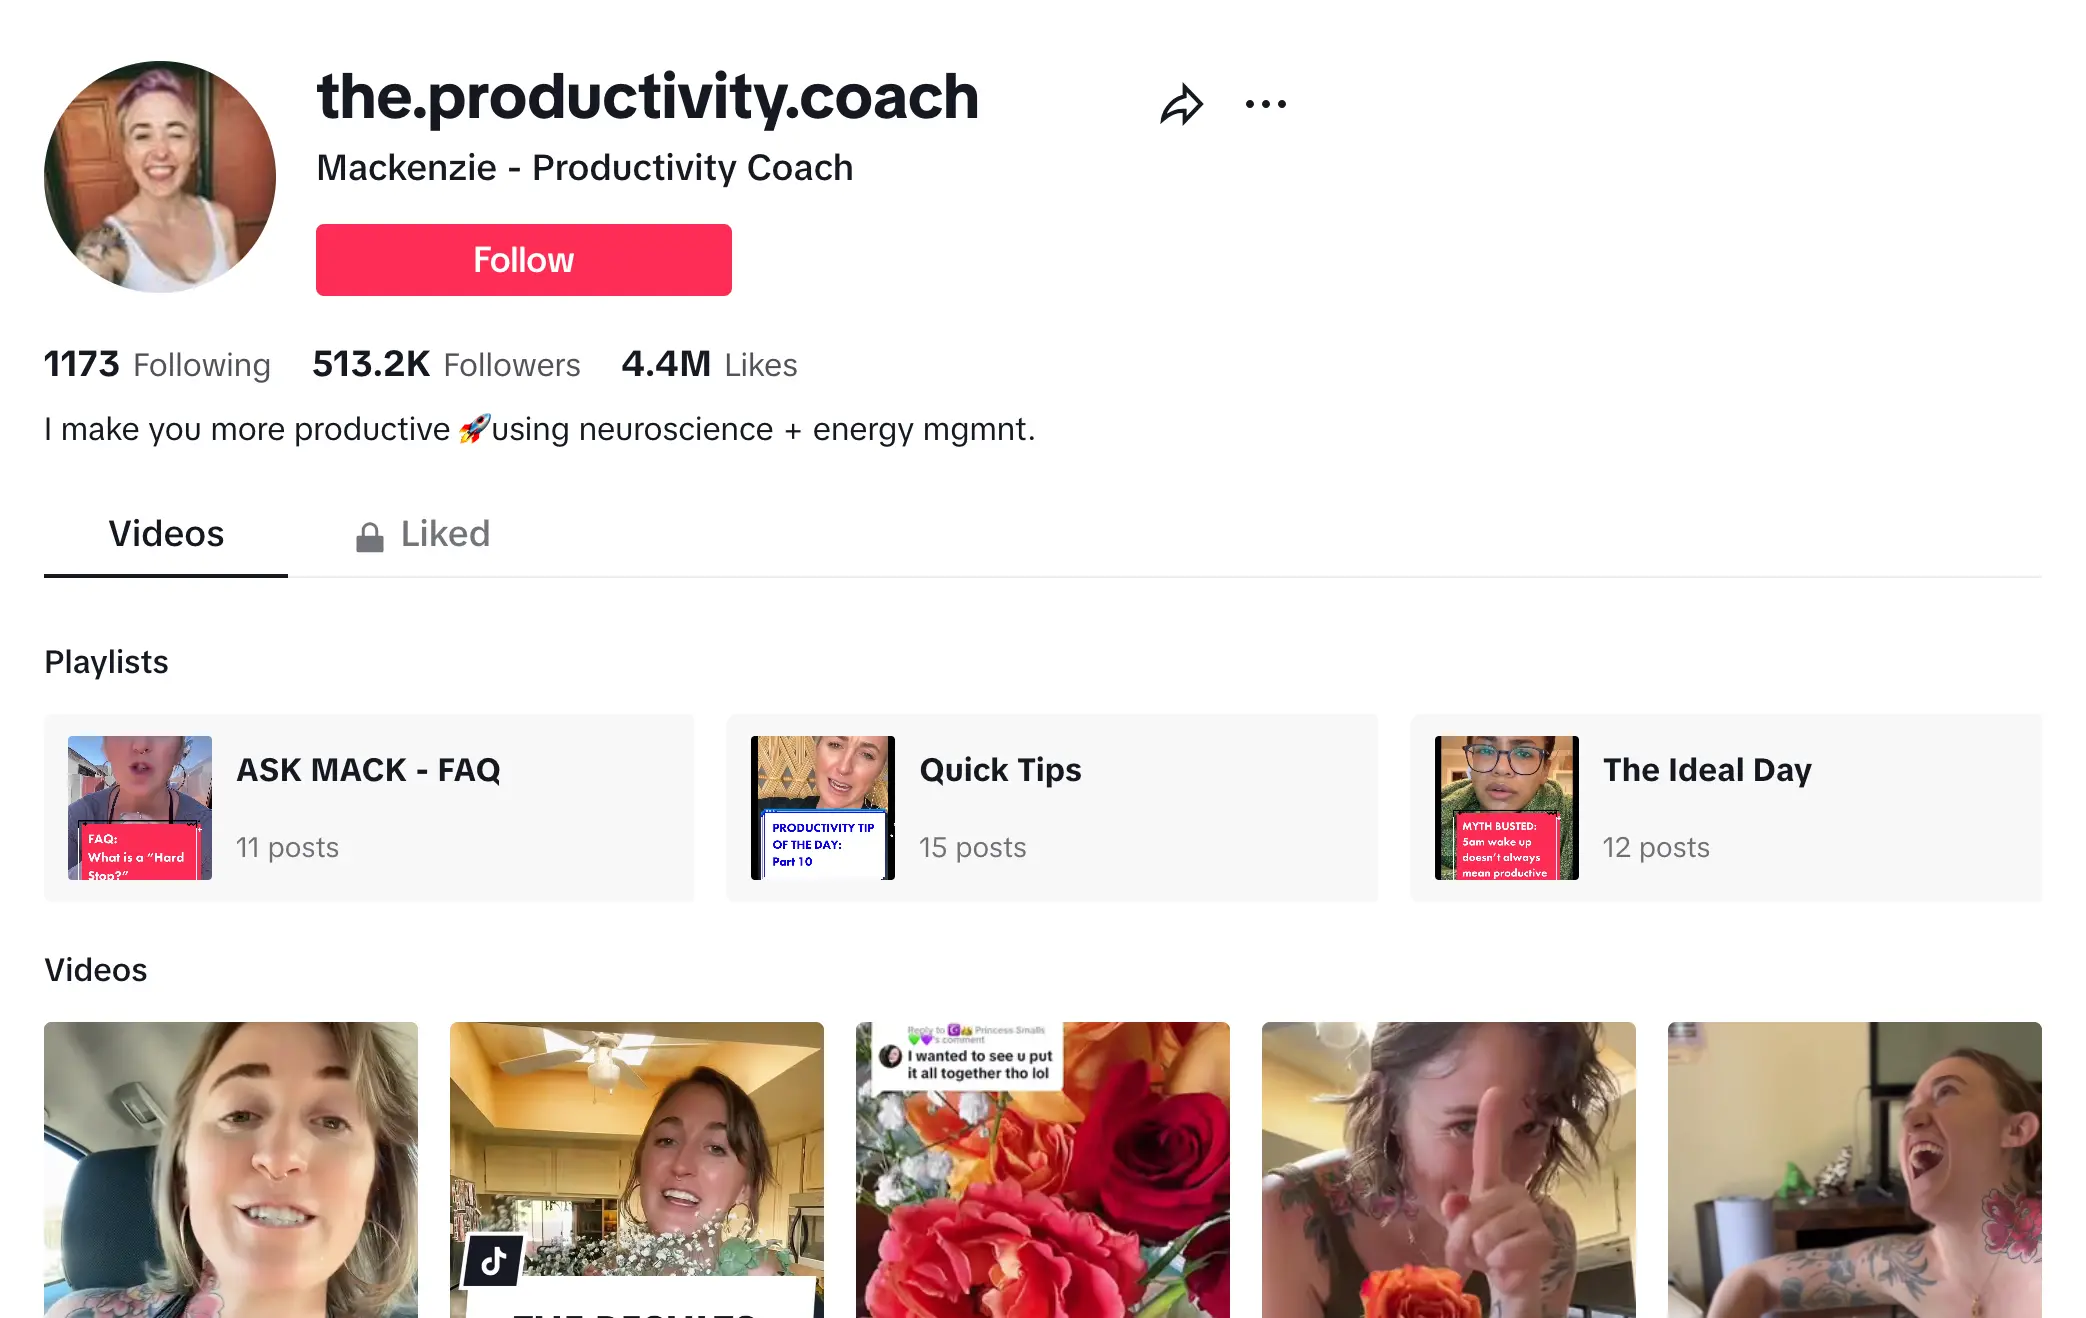 Screenshot of TikTok page for The Productivity Coach